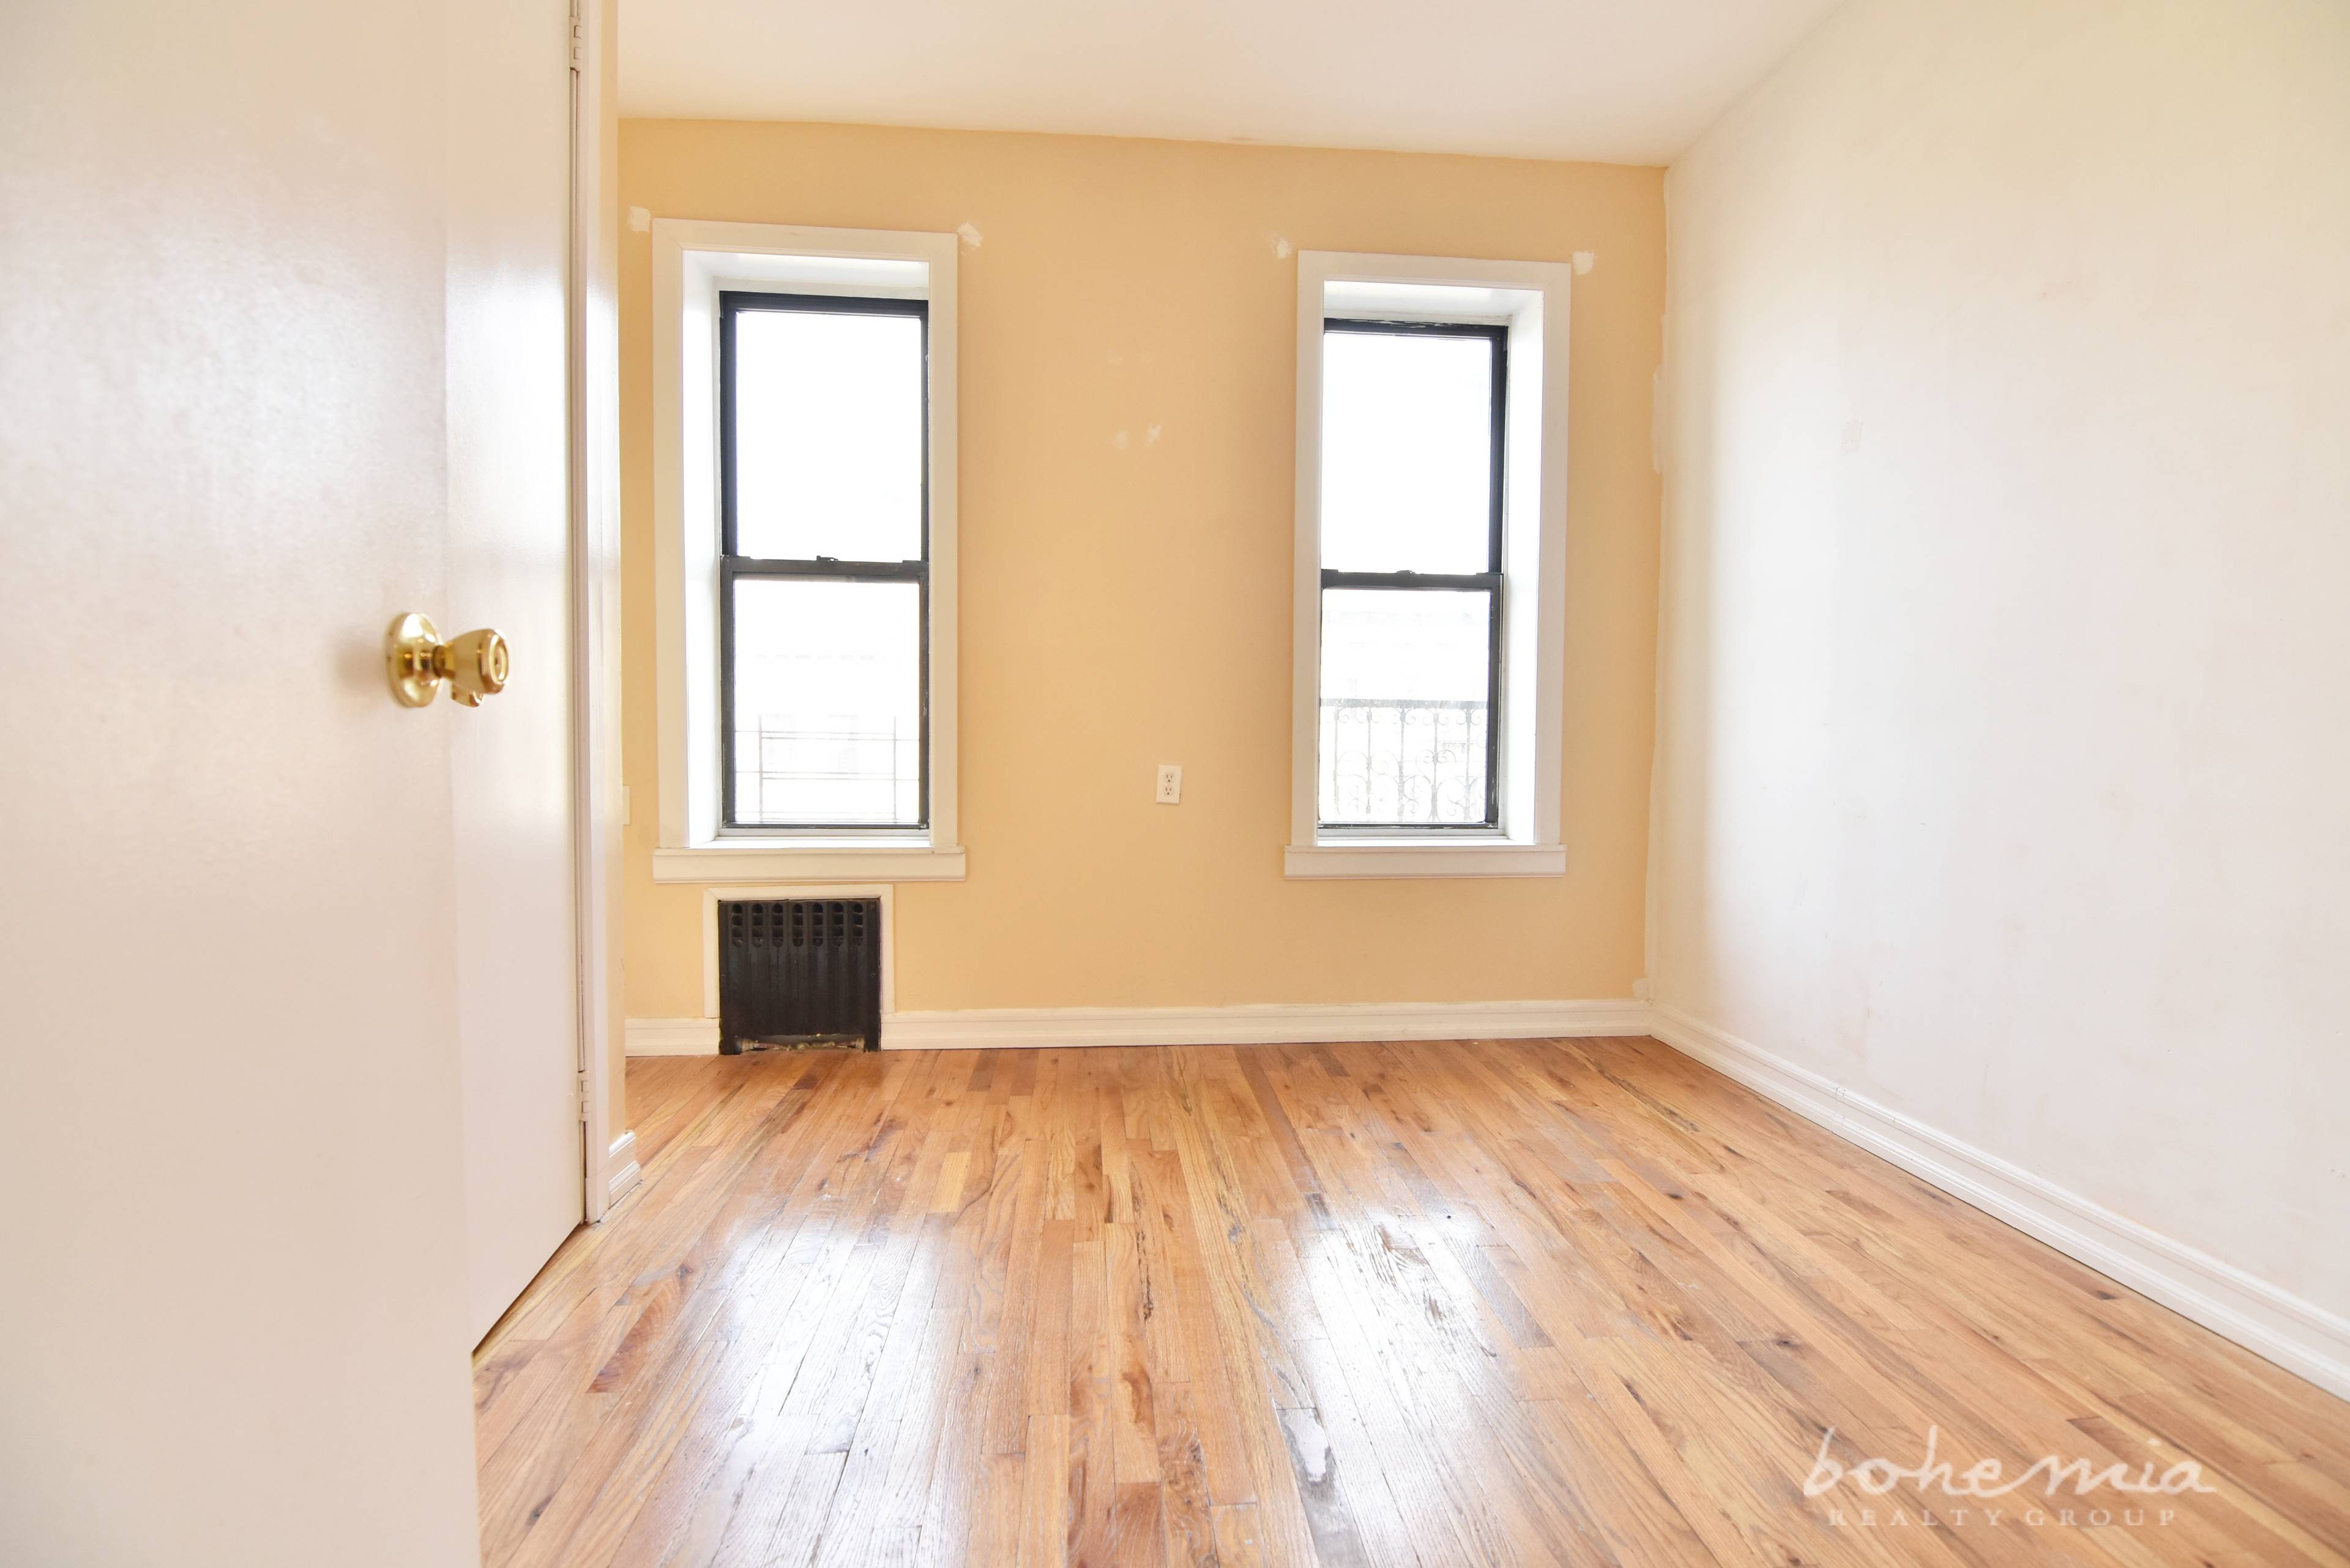 Location 135th and Amsterdam Bright, exposed brick 3bed with expansive views nestled between Riverside and St Nick's Park up the block from City College and Columbia University.